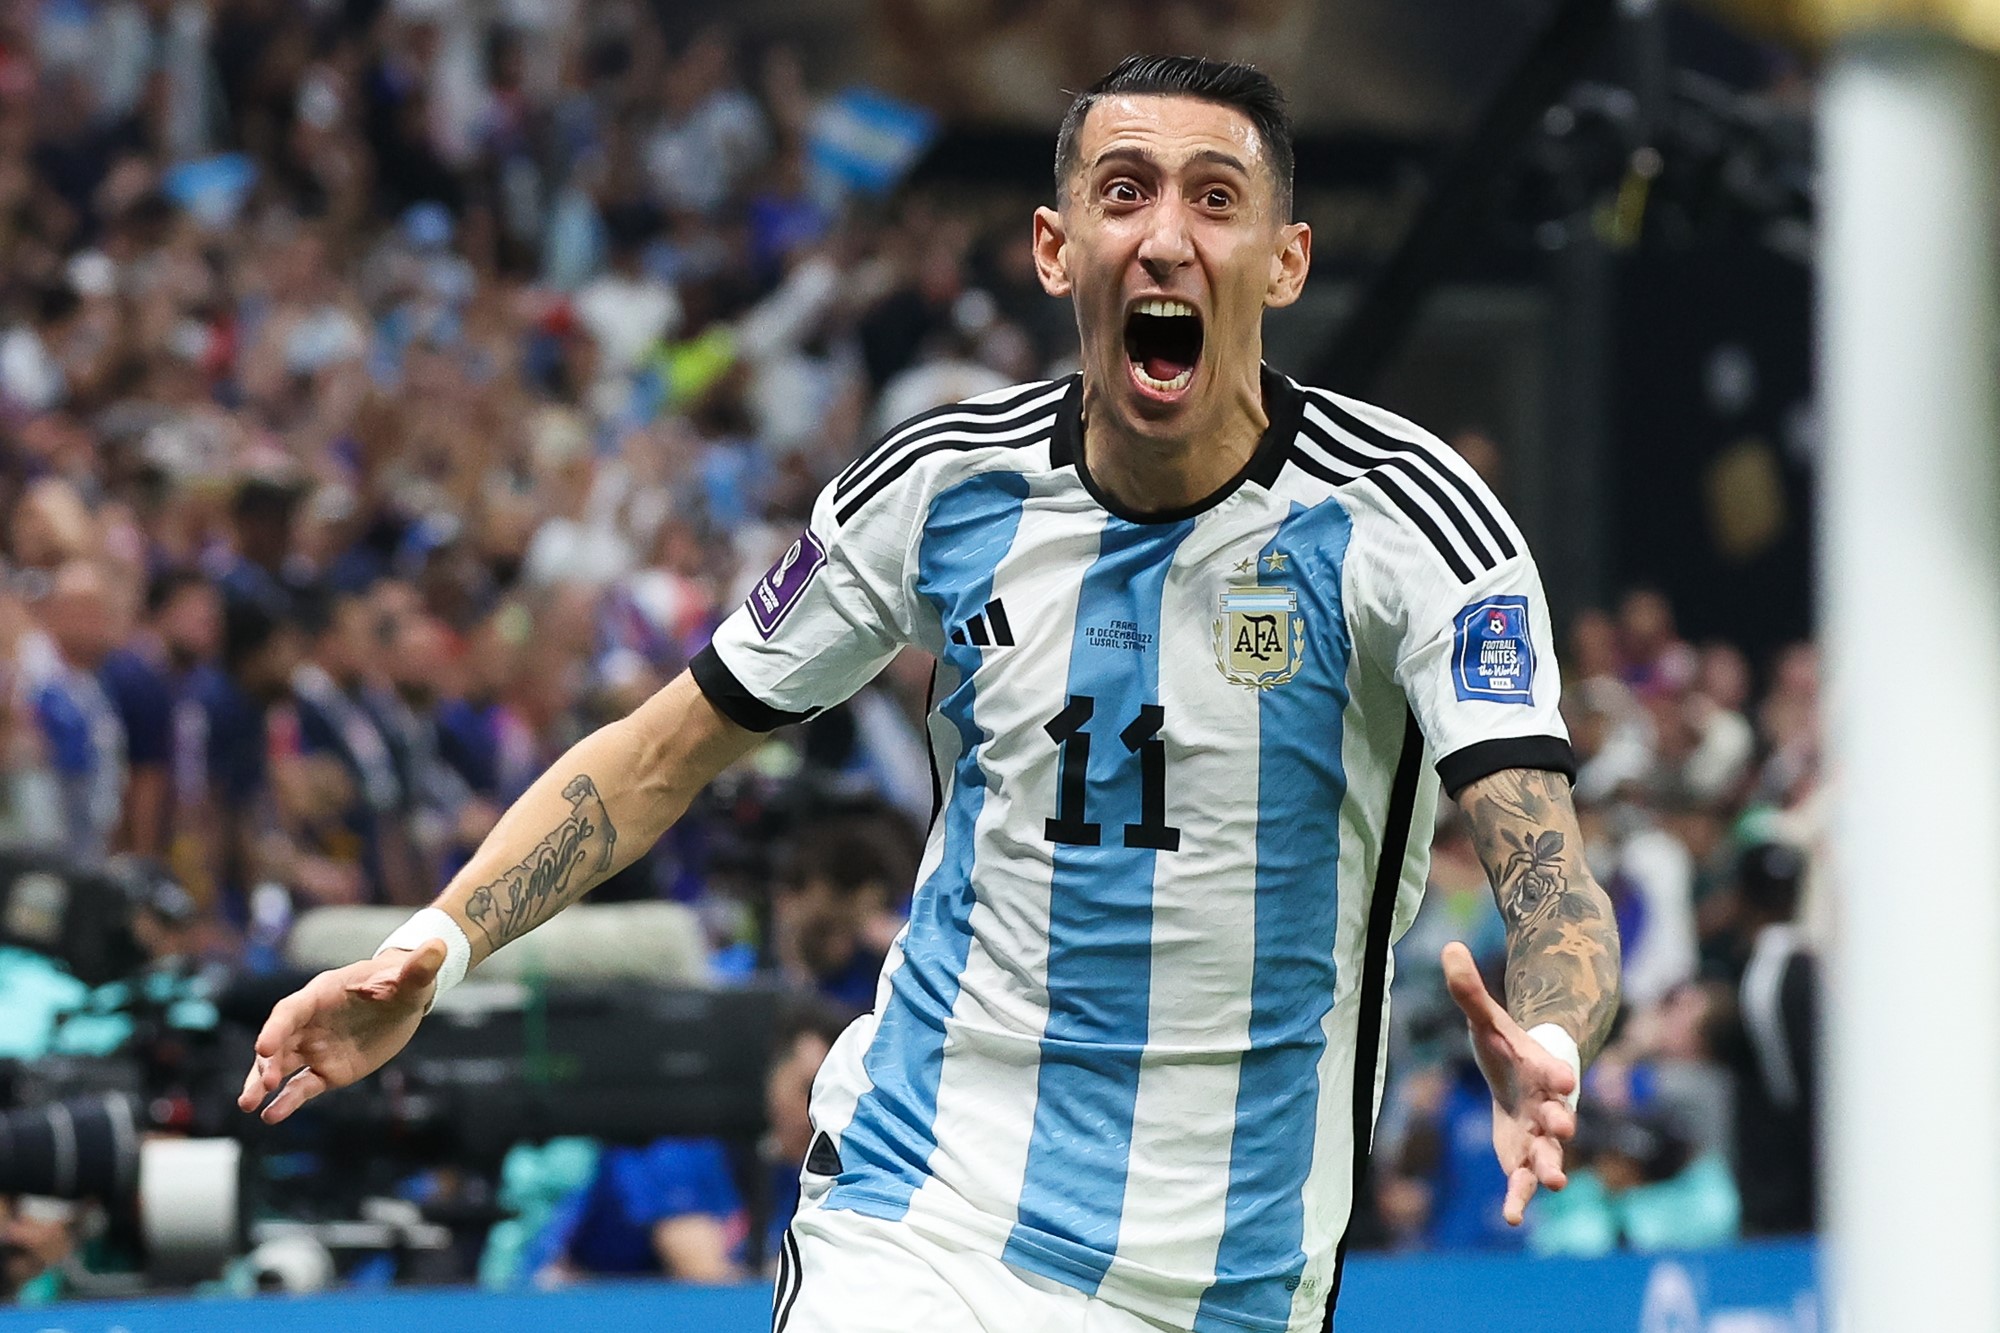 Lionel Messis Argentina win the 2022 FIFA World Cup in penalty shootout after thrilling 3-3 draw with France